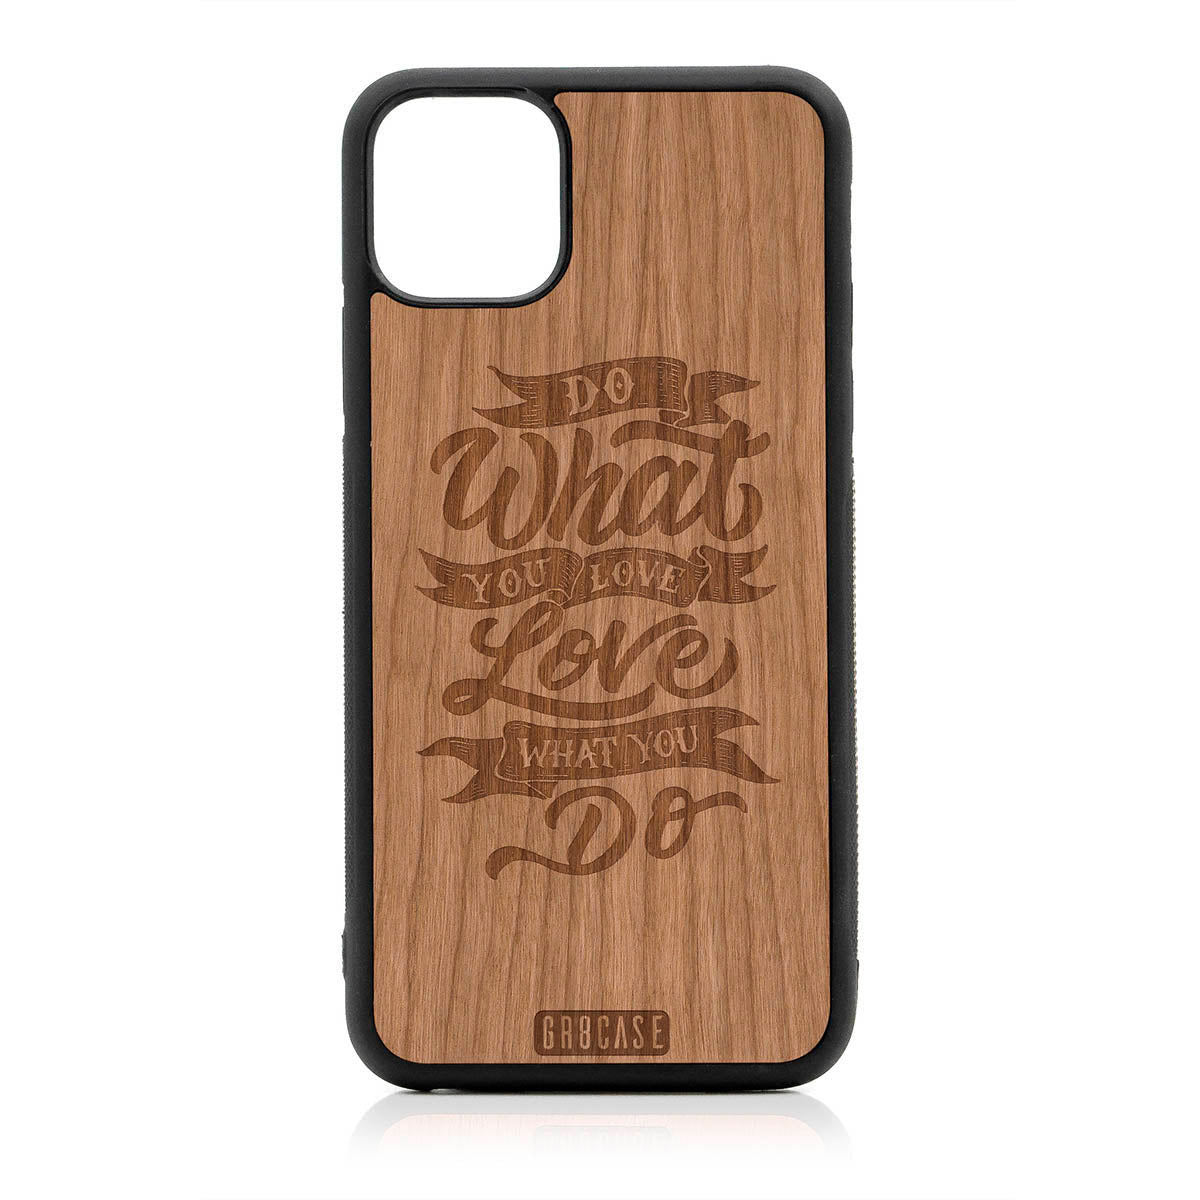 Do What You Love Love What You Do Design Wood Case For iPhone 11 Pro Max by GR8CASE